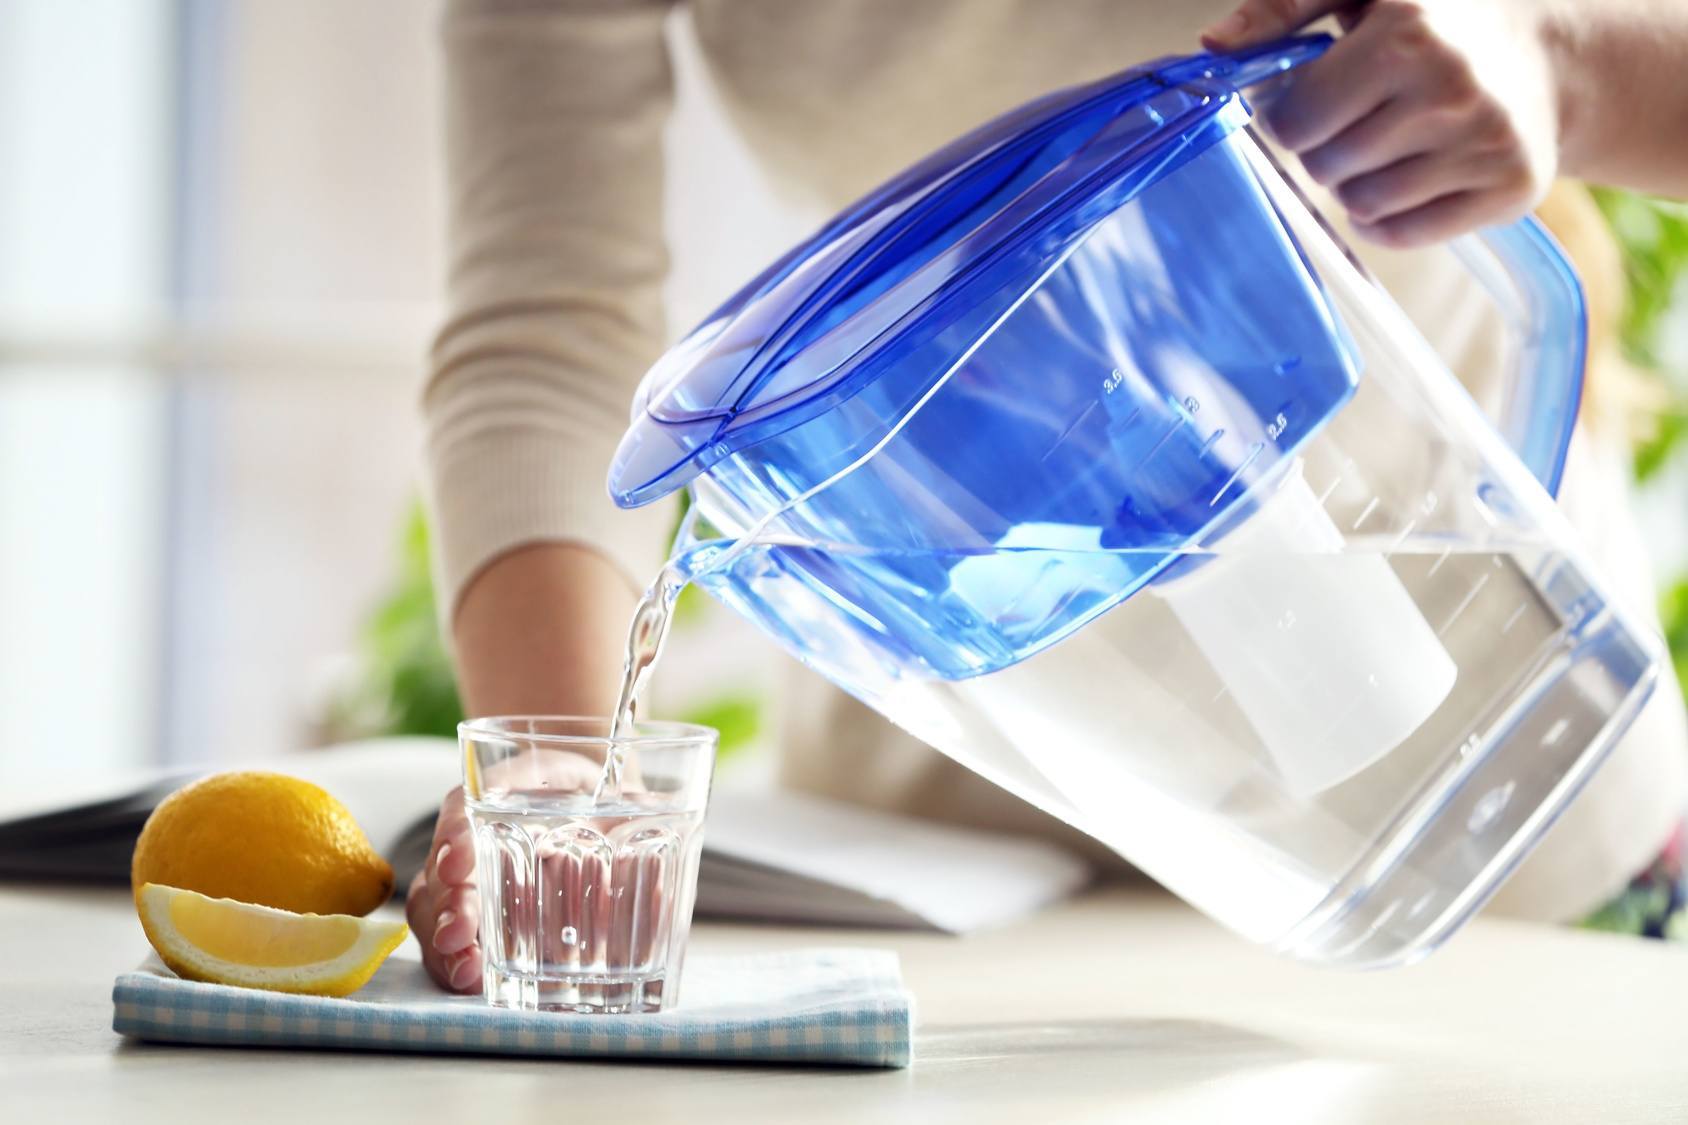 How Water Supports a Healthy Digestive System